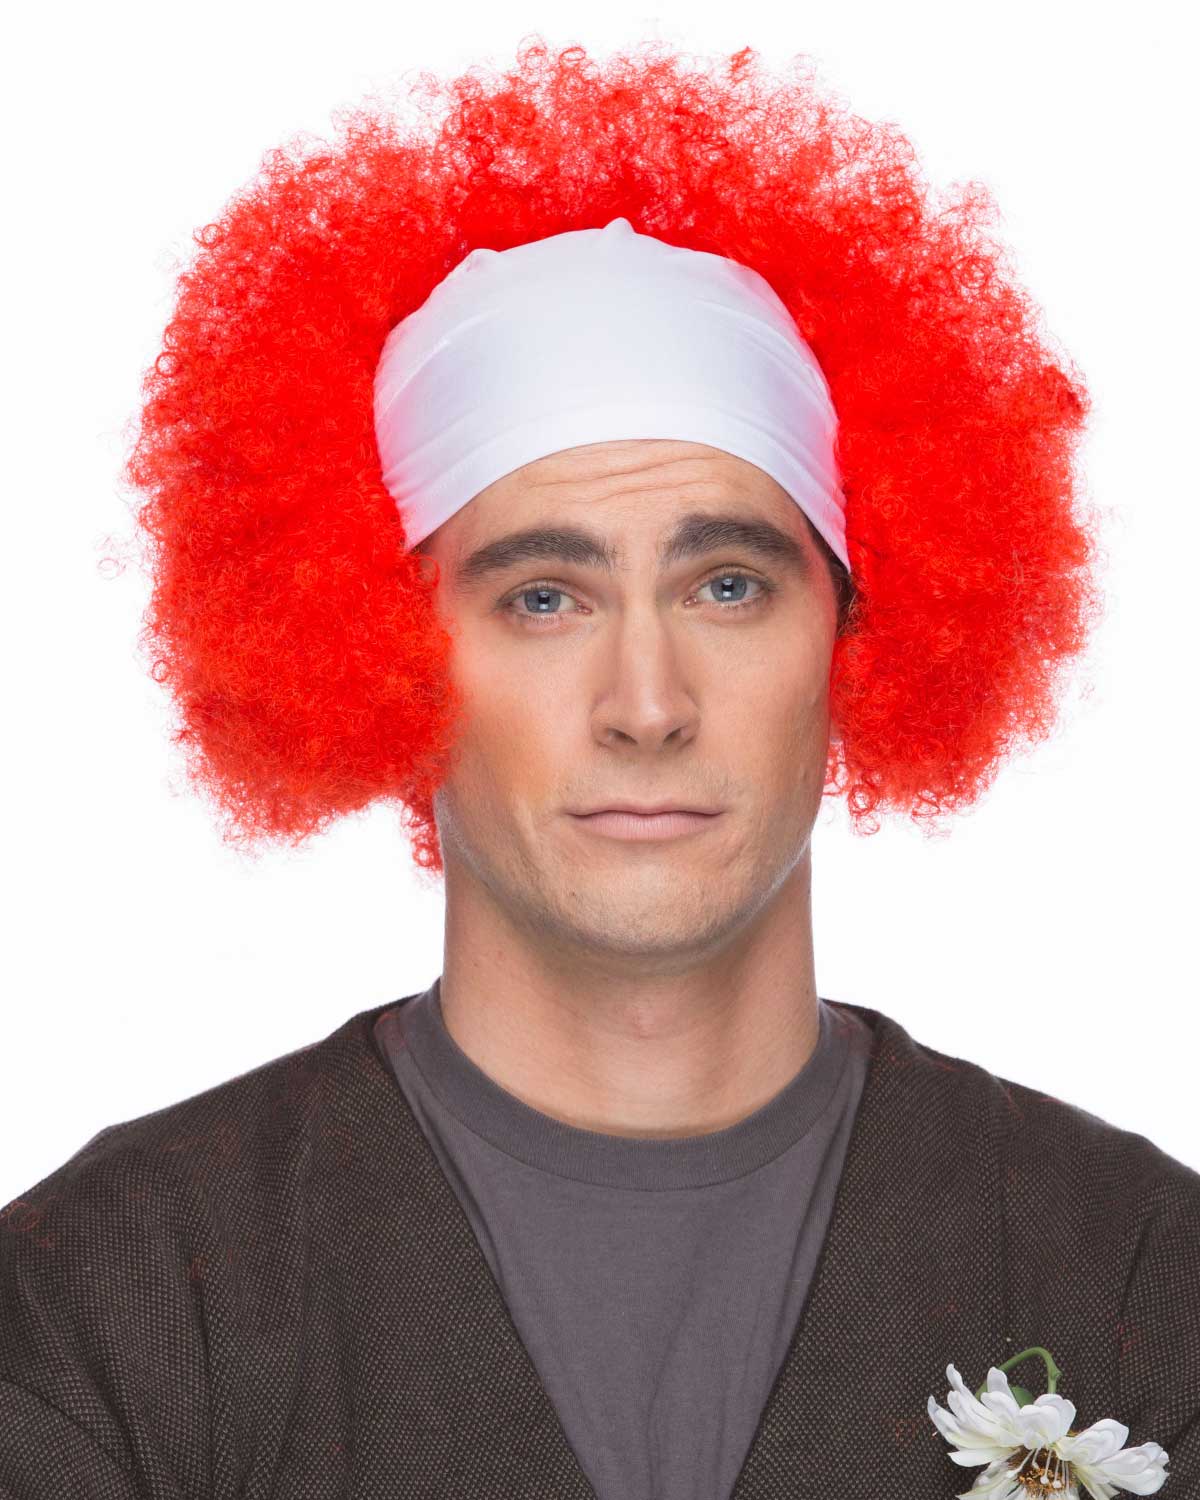 Curly Bald Clown (Homey Bald Clown) in Red